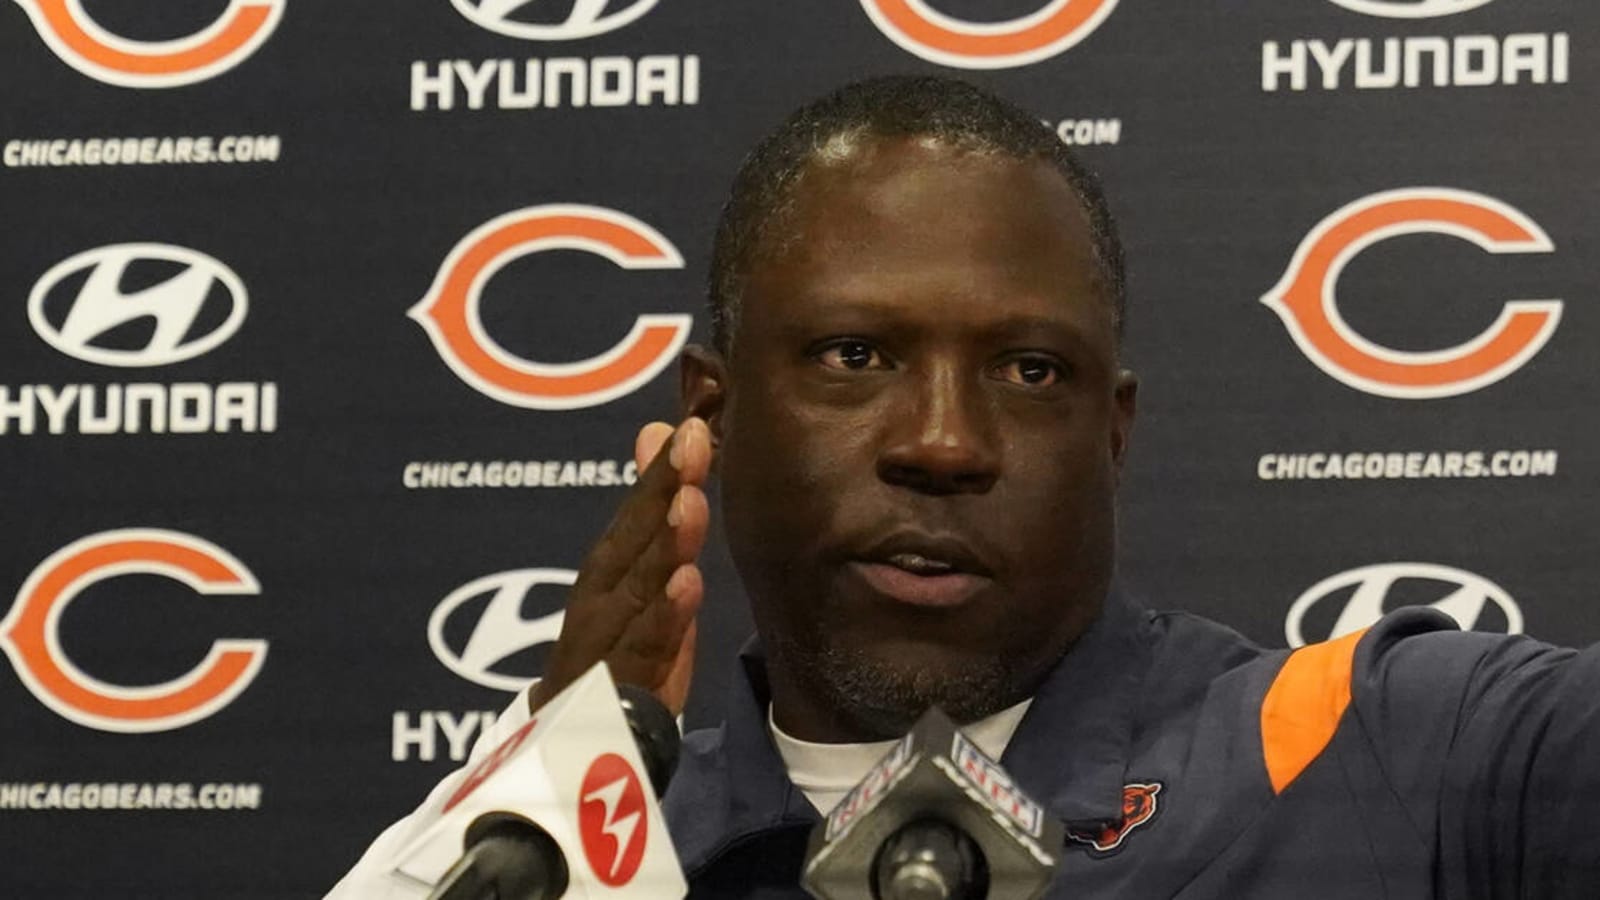 Bears coach resigns after stepping away from team